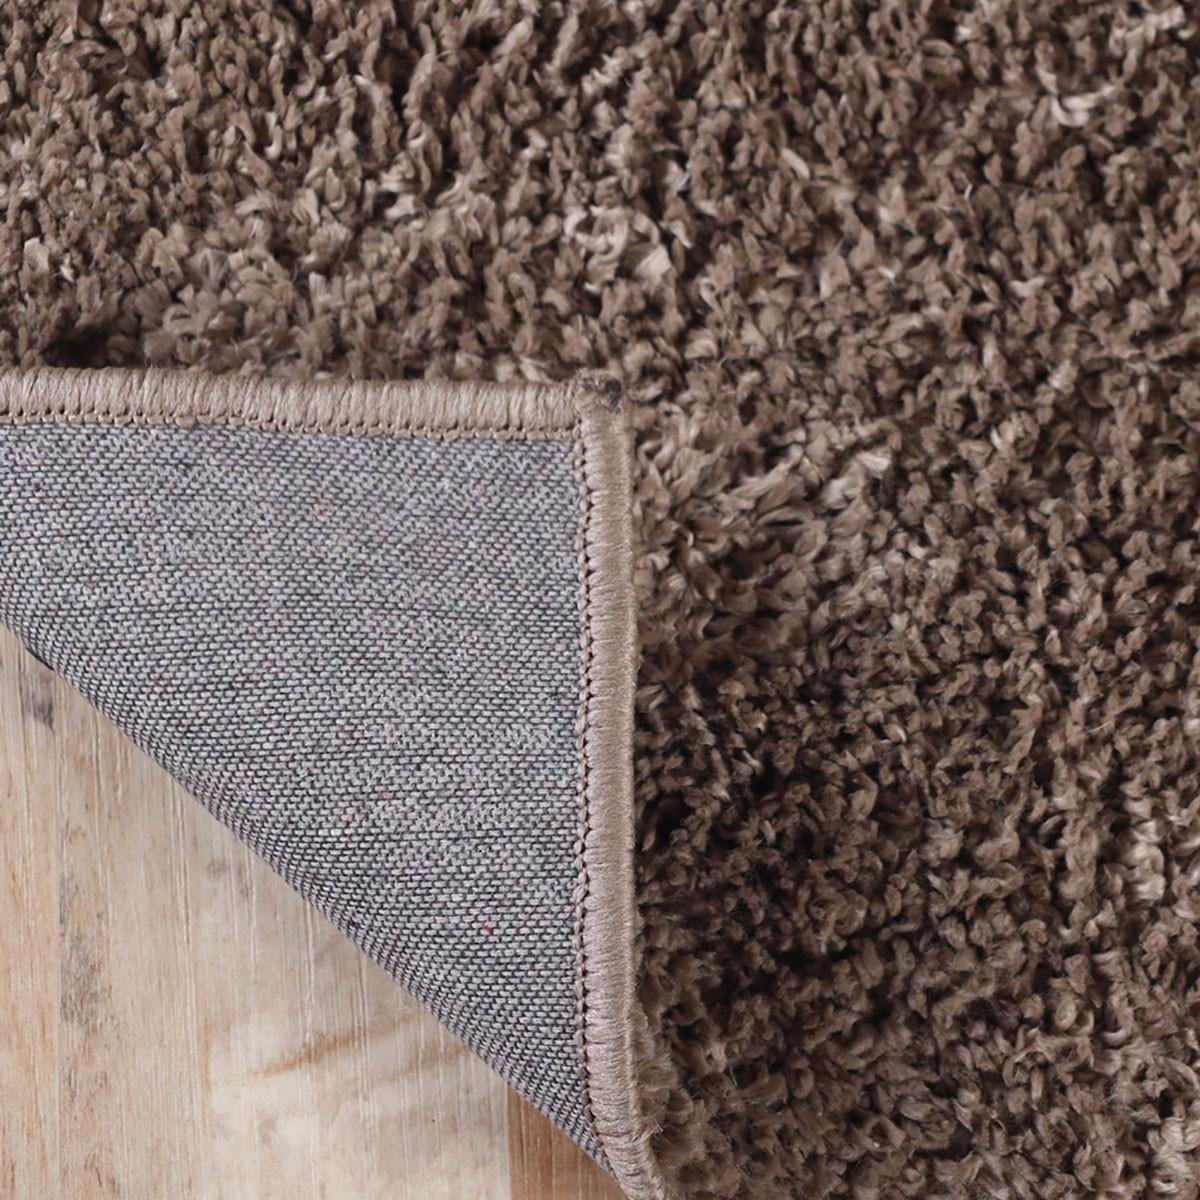 8' X 10' Taupe Shag Stain Resistant Area Rug